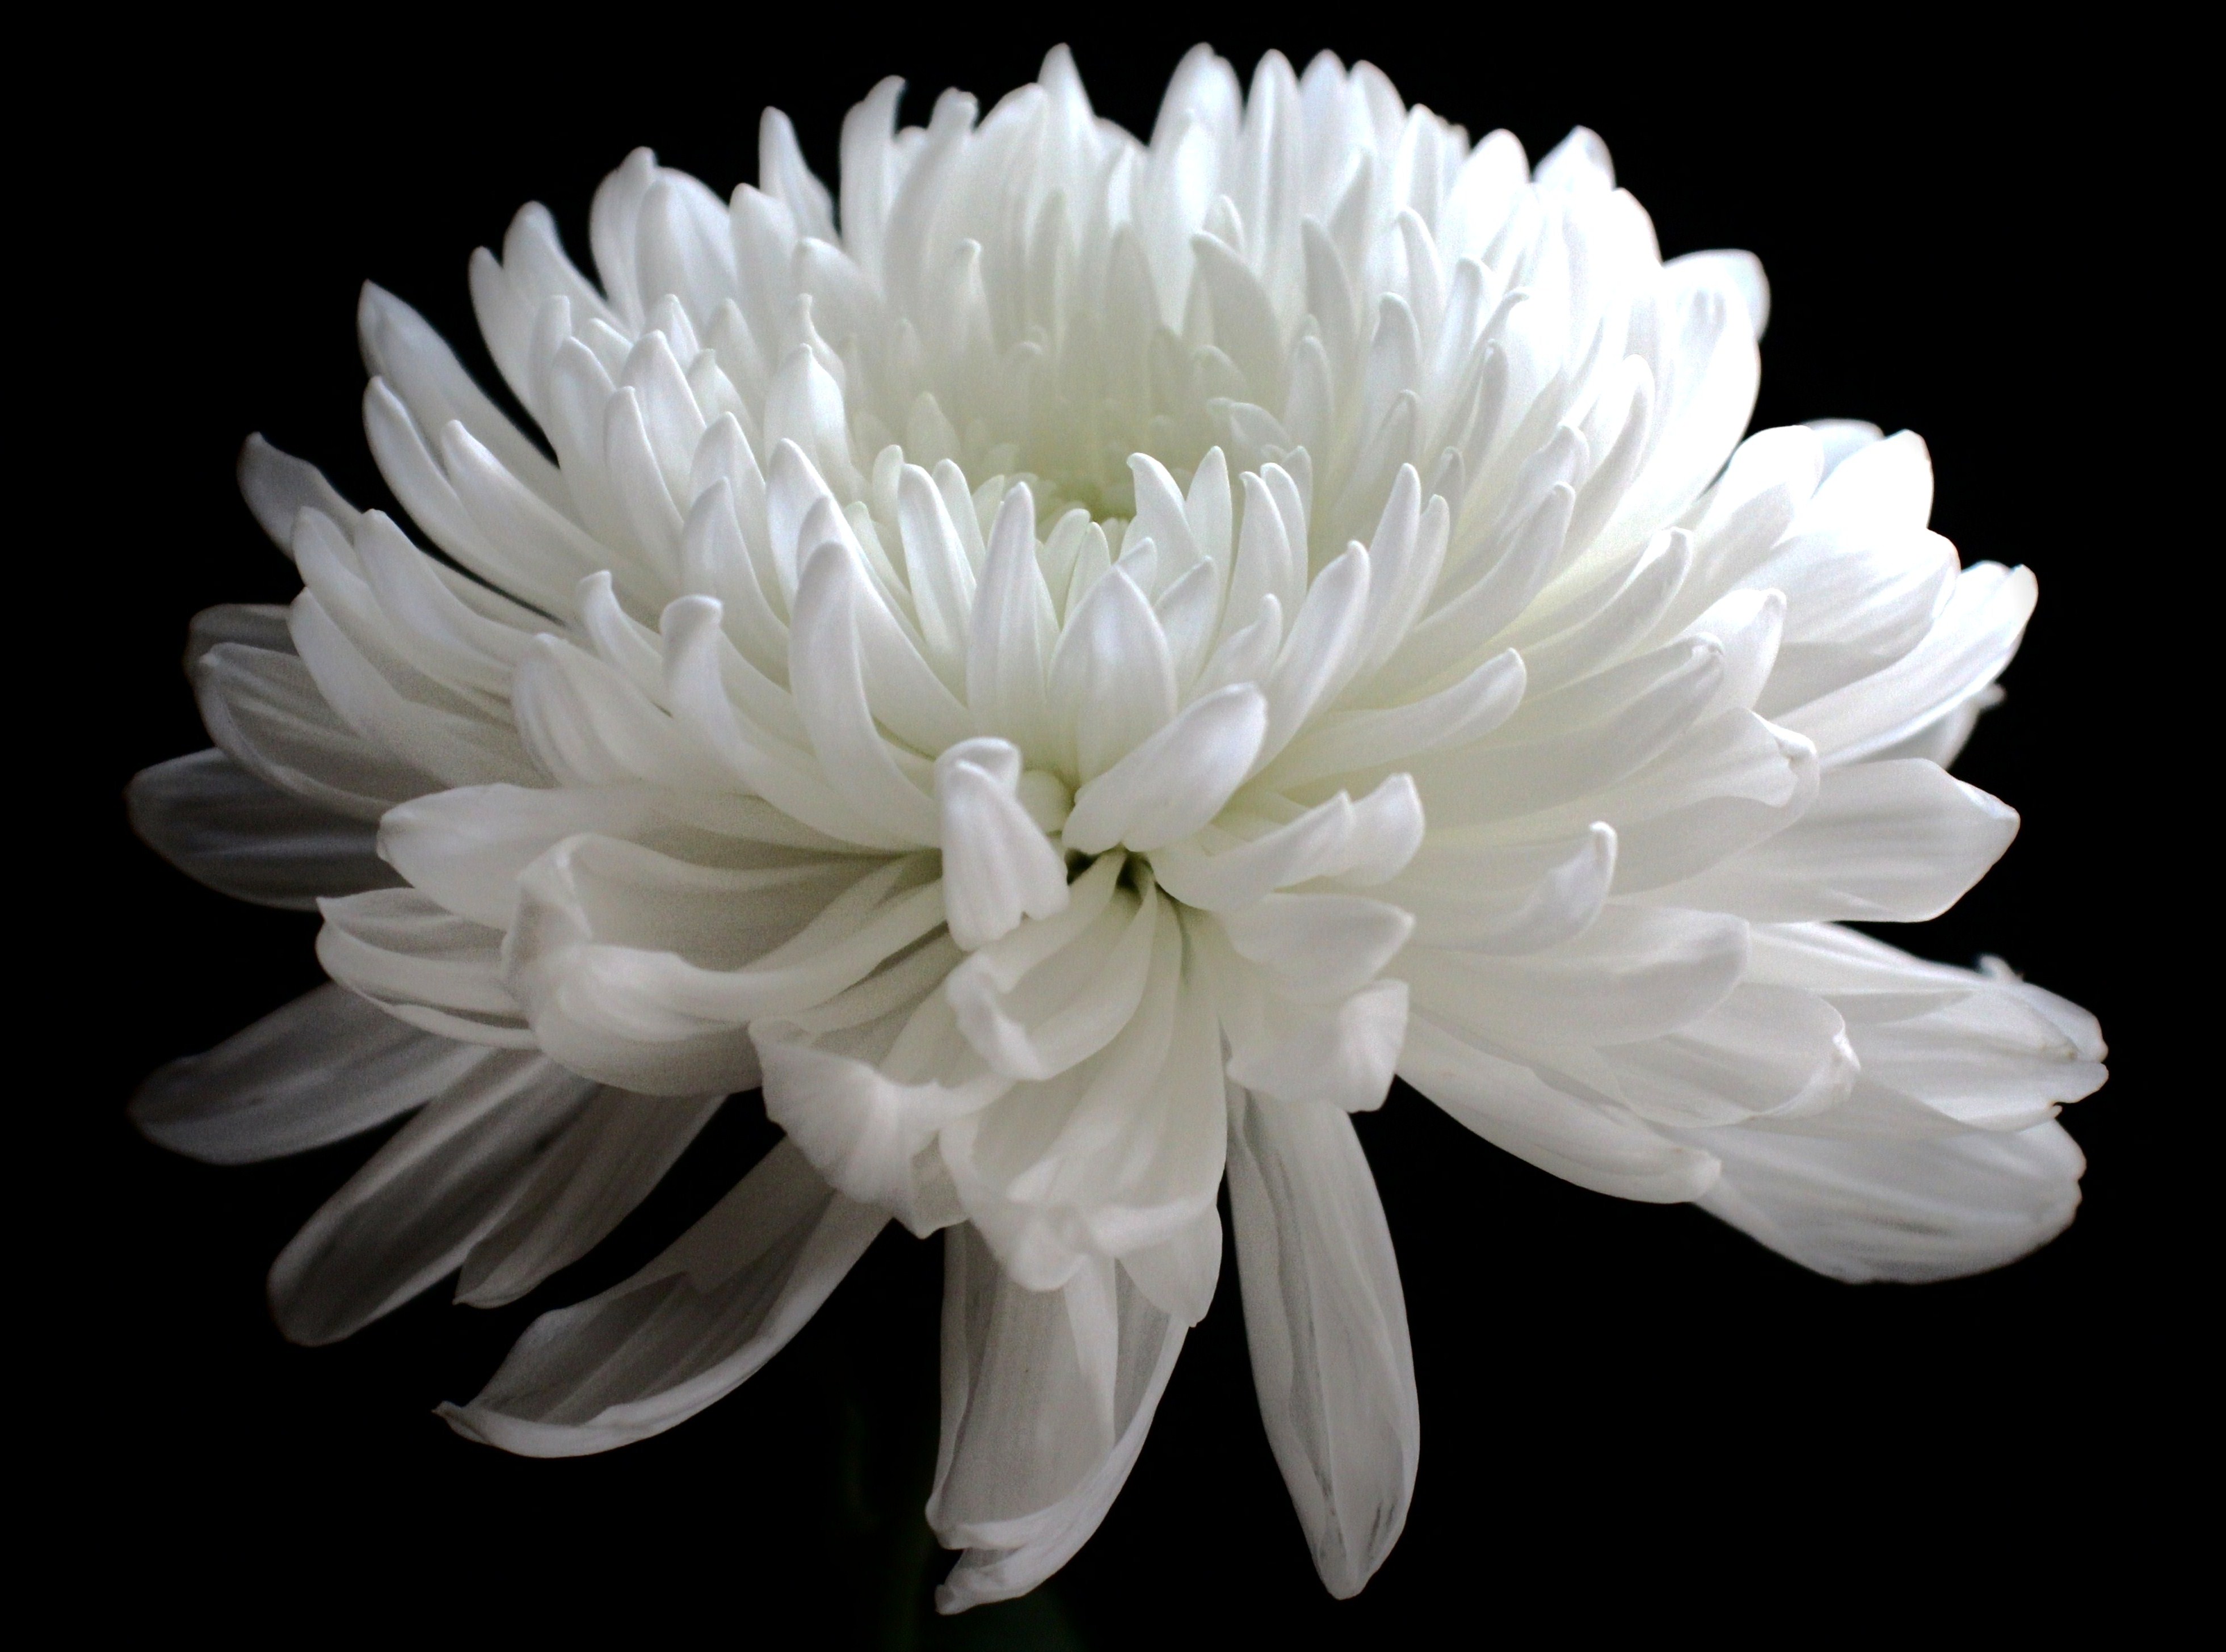 White Spider Mum Flower | Flowers, Trees, & Other Such Gifts of Nature